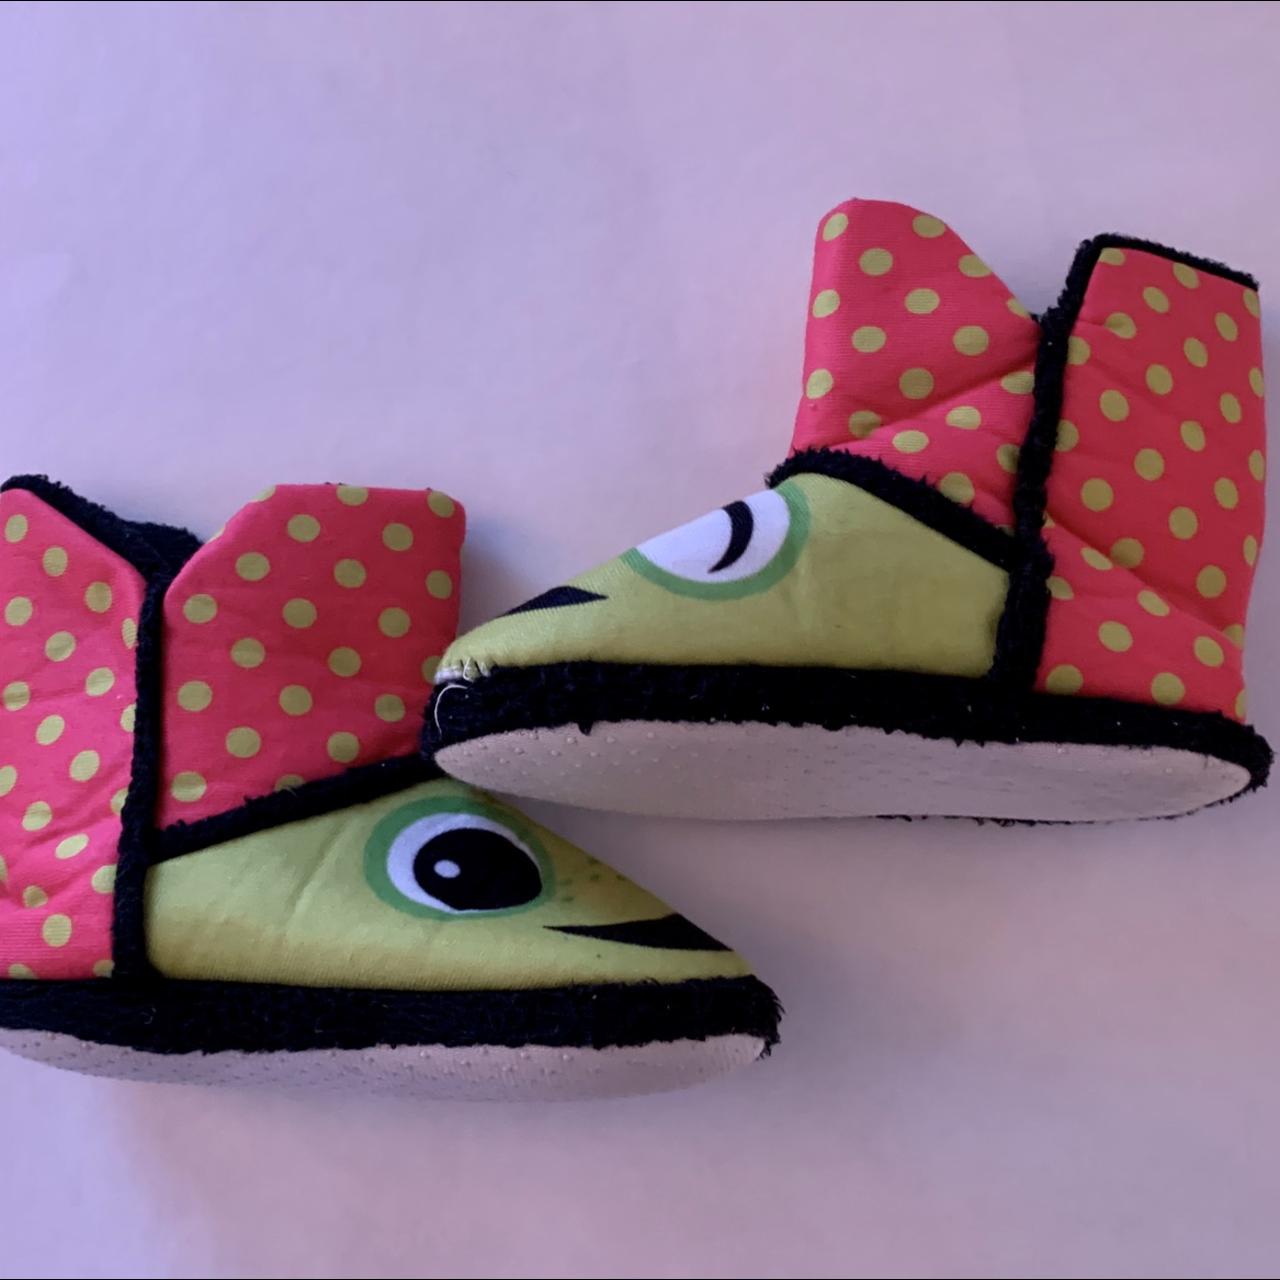 Product Image 2 - #Froggy #Slippers. Size #11/12. Very